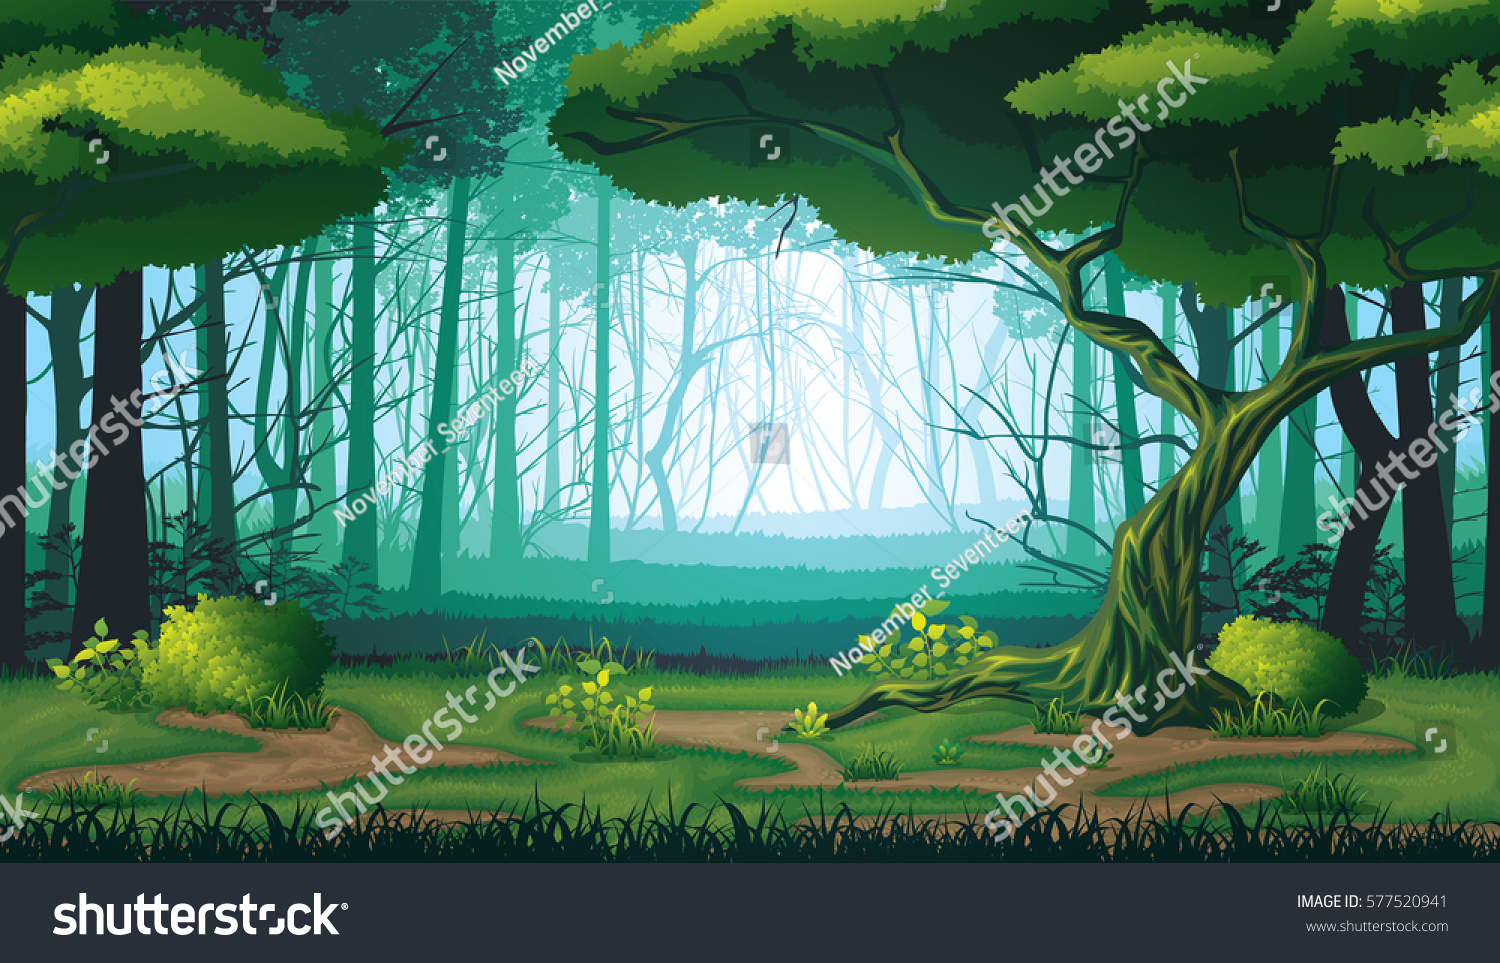 High Quality Horizontal Seamless Background Landscape Stock Vector